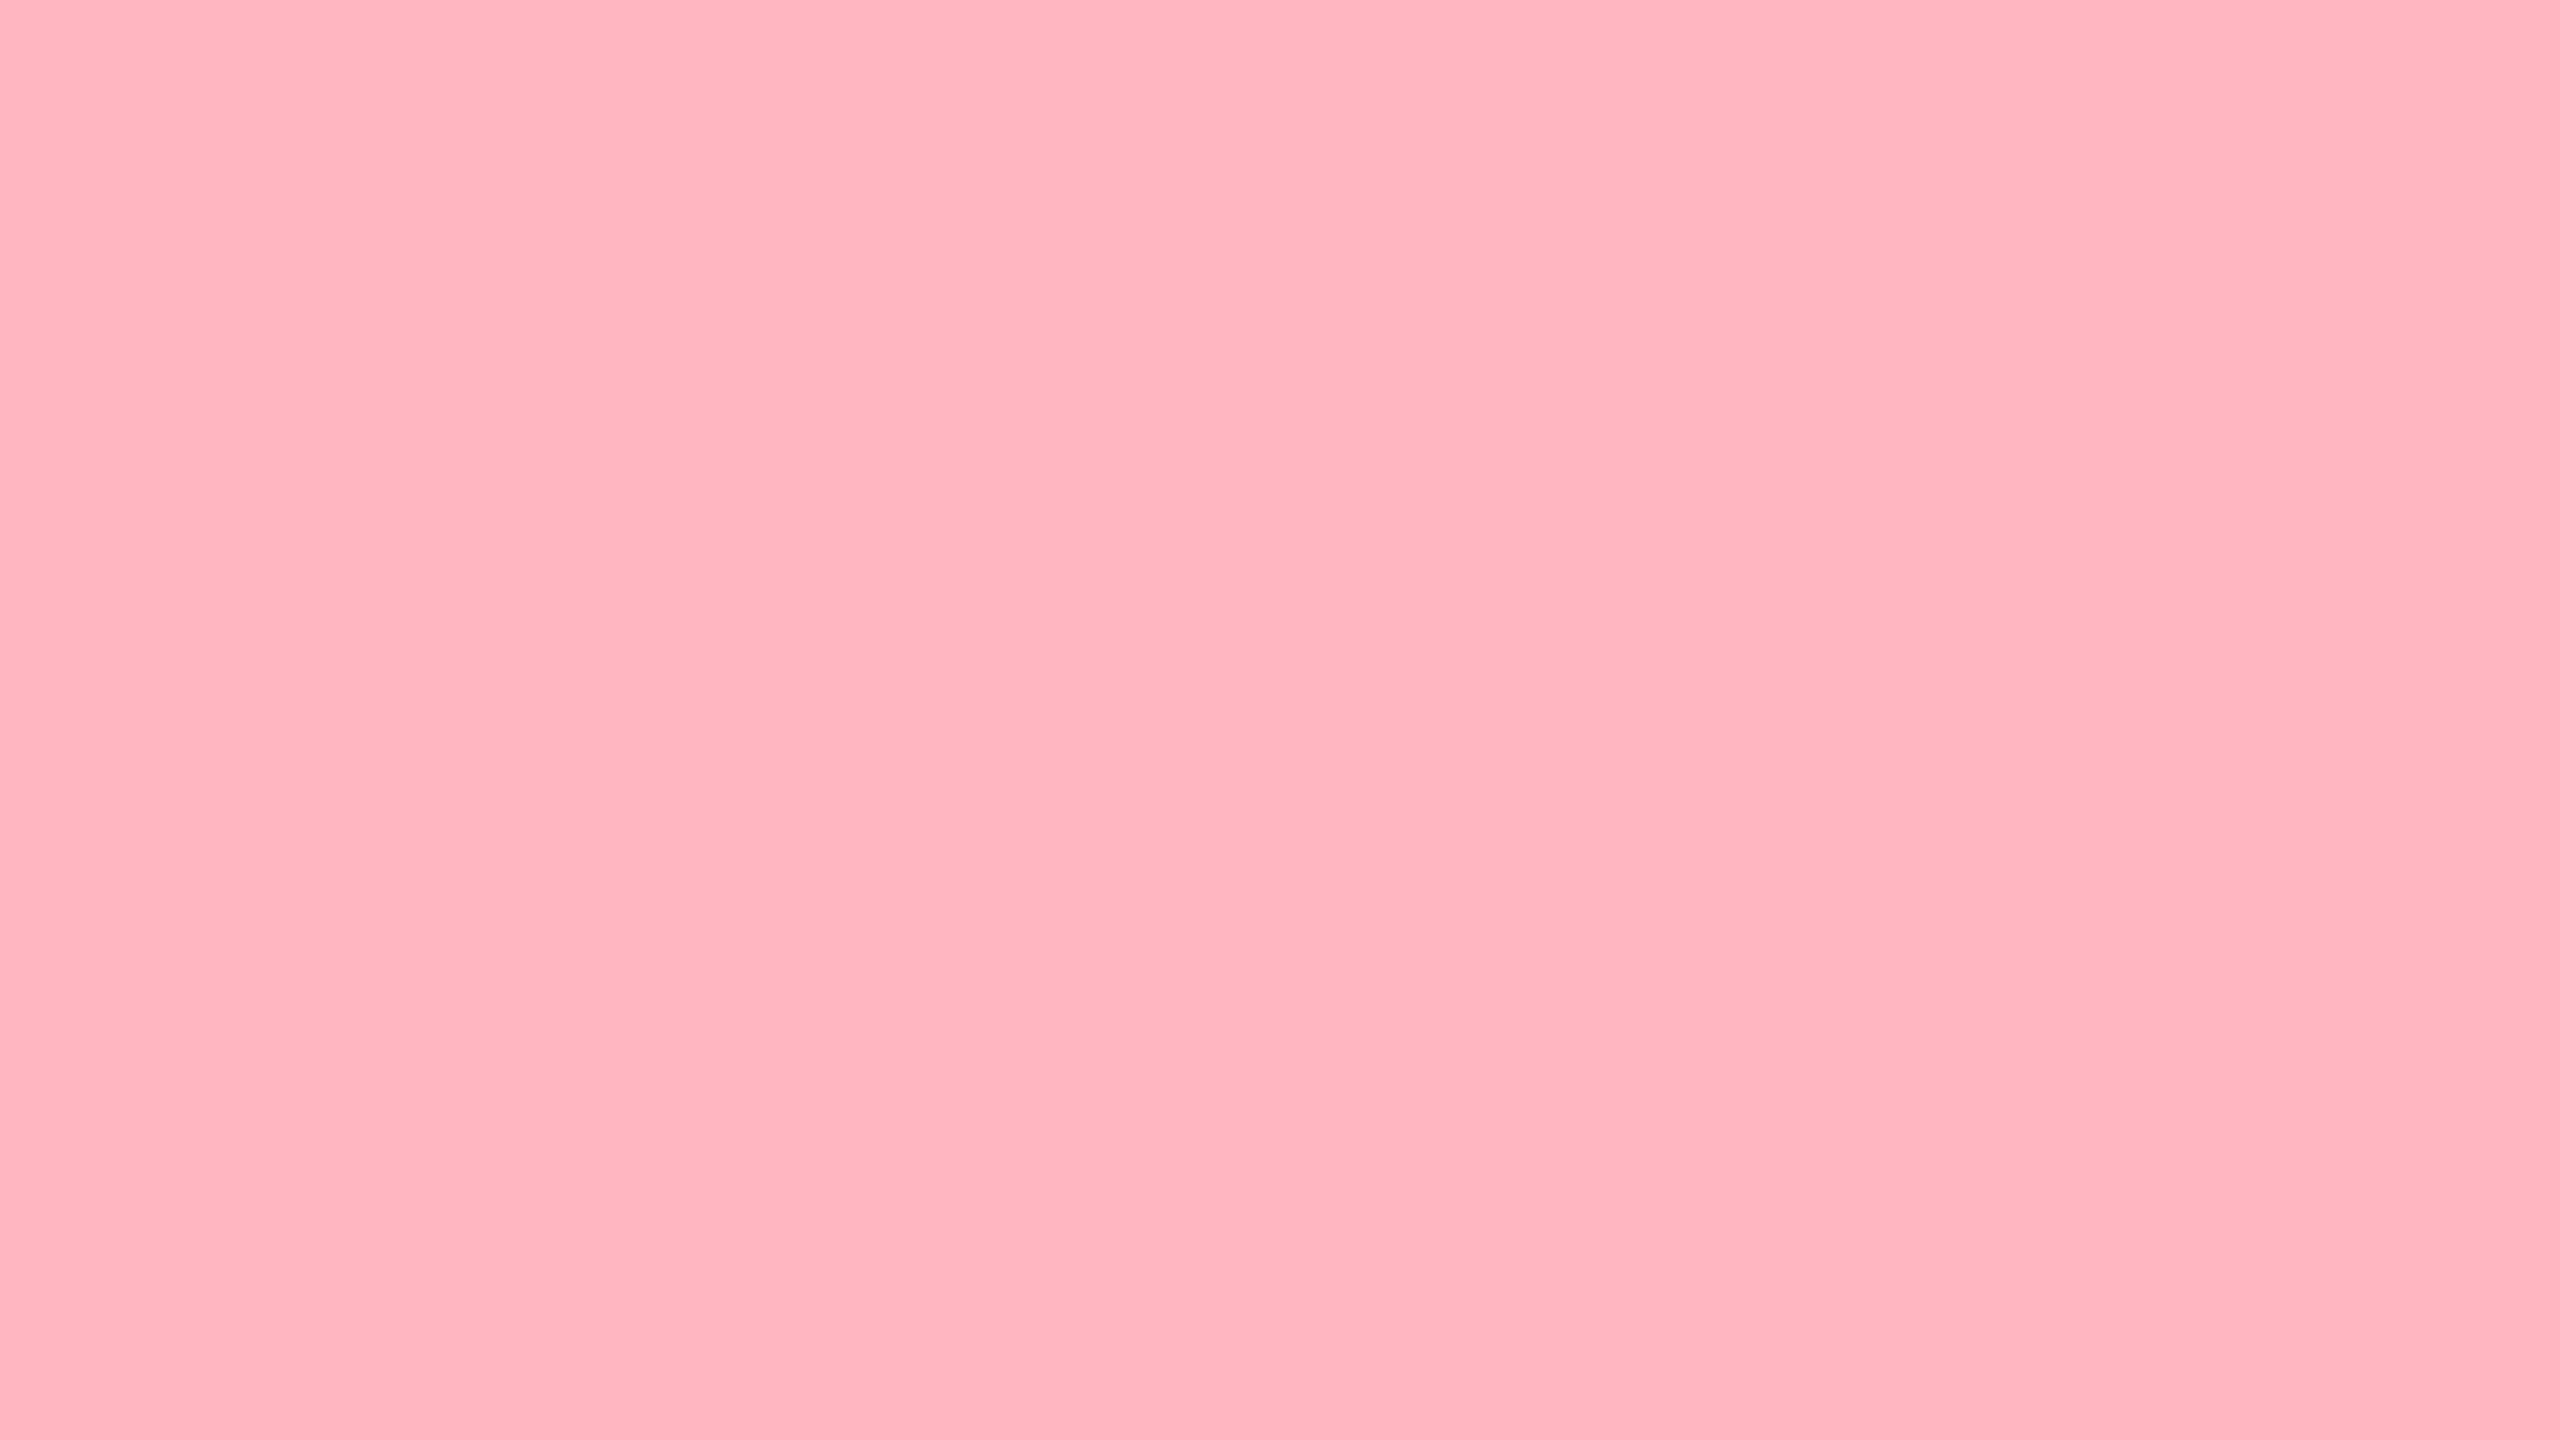 Backgrounds Pink Tumblr - Wallpaper Cave